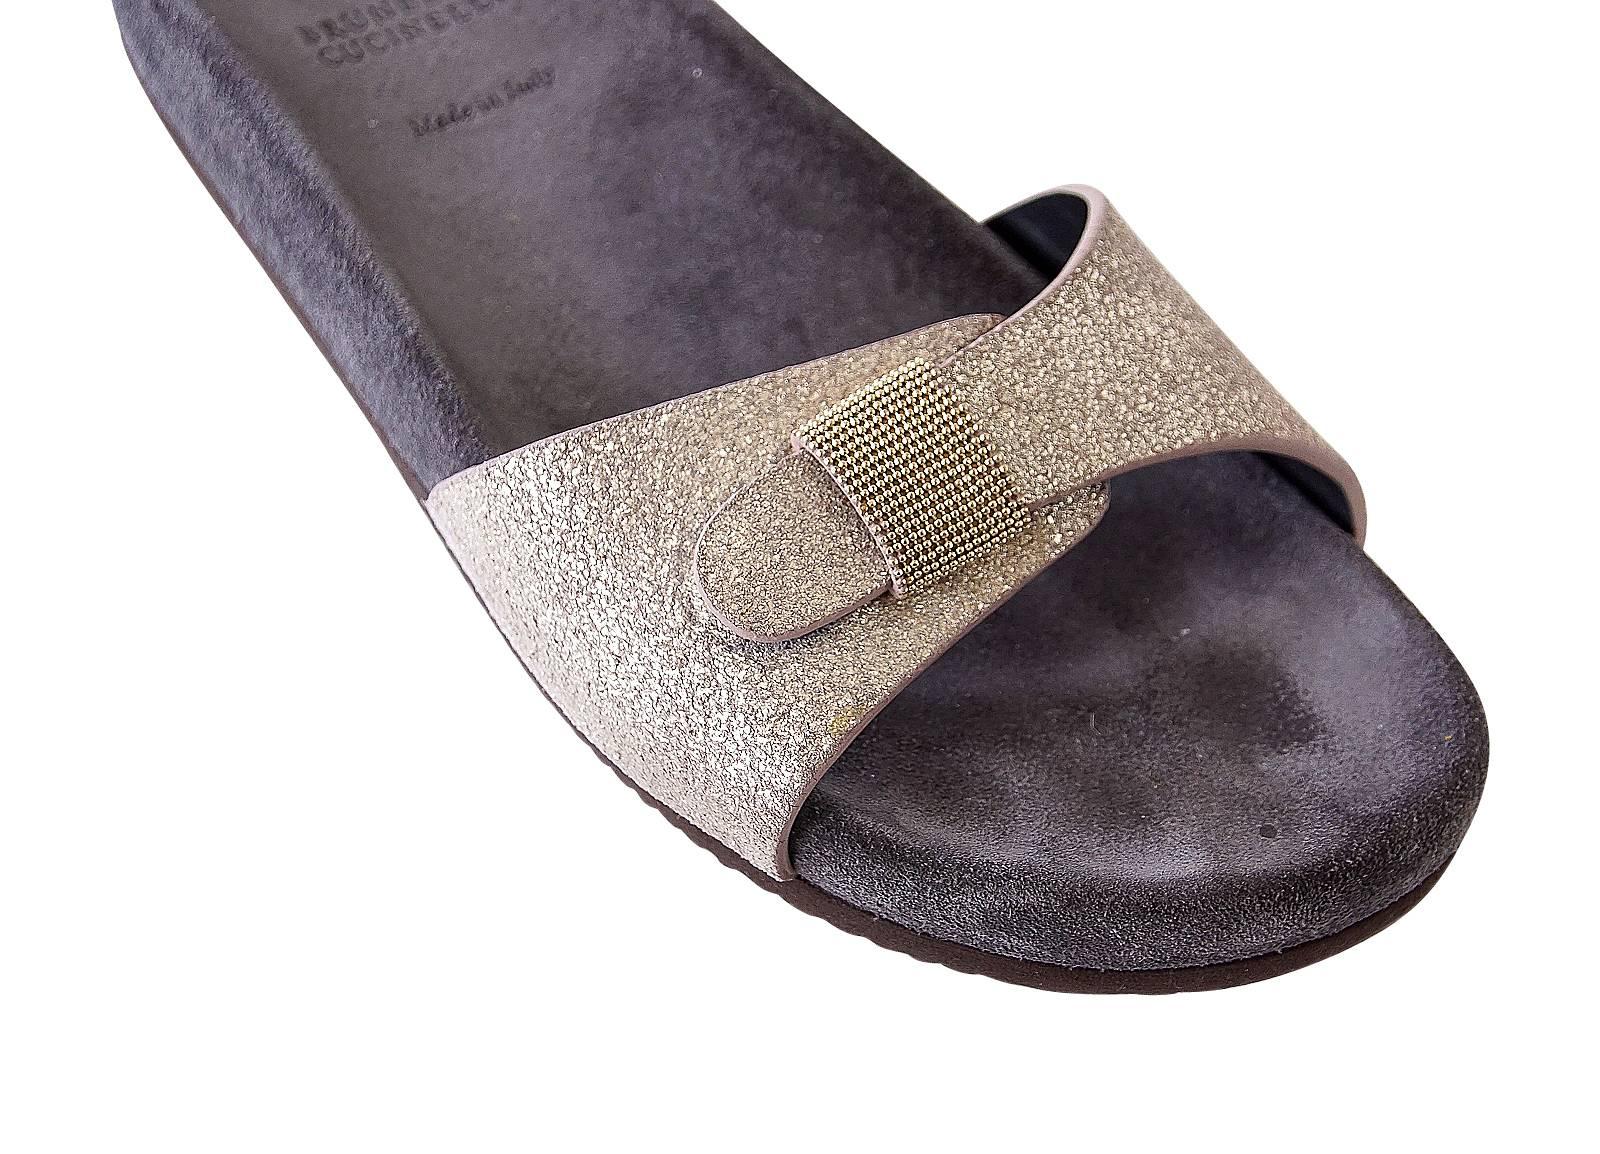 Guaranteed authentic Brunello Cucinelli soft metallic gold silvery slide.
Soft toned gold slide with signature beading on strap.
Inner sole is brown suede. 
Sandal was worn once indoors.
final sale

SIZE 37.5
USA SIZE 7.5

SHOE MEASURES:
HEEL